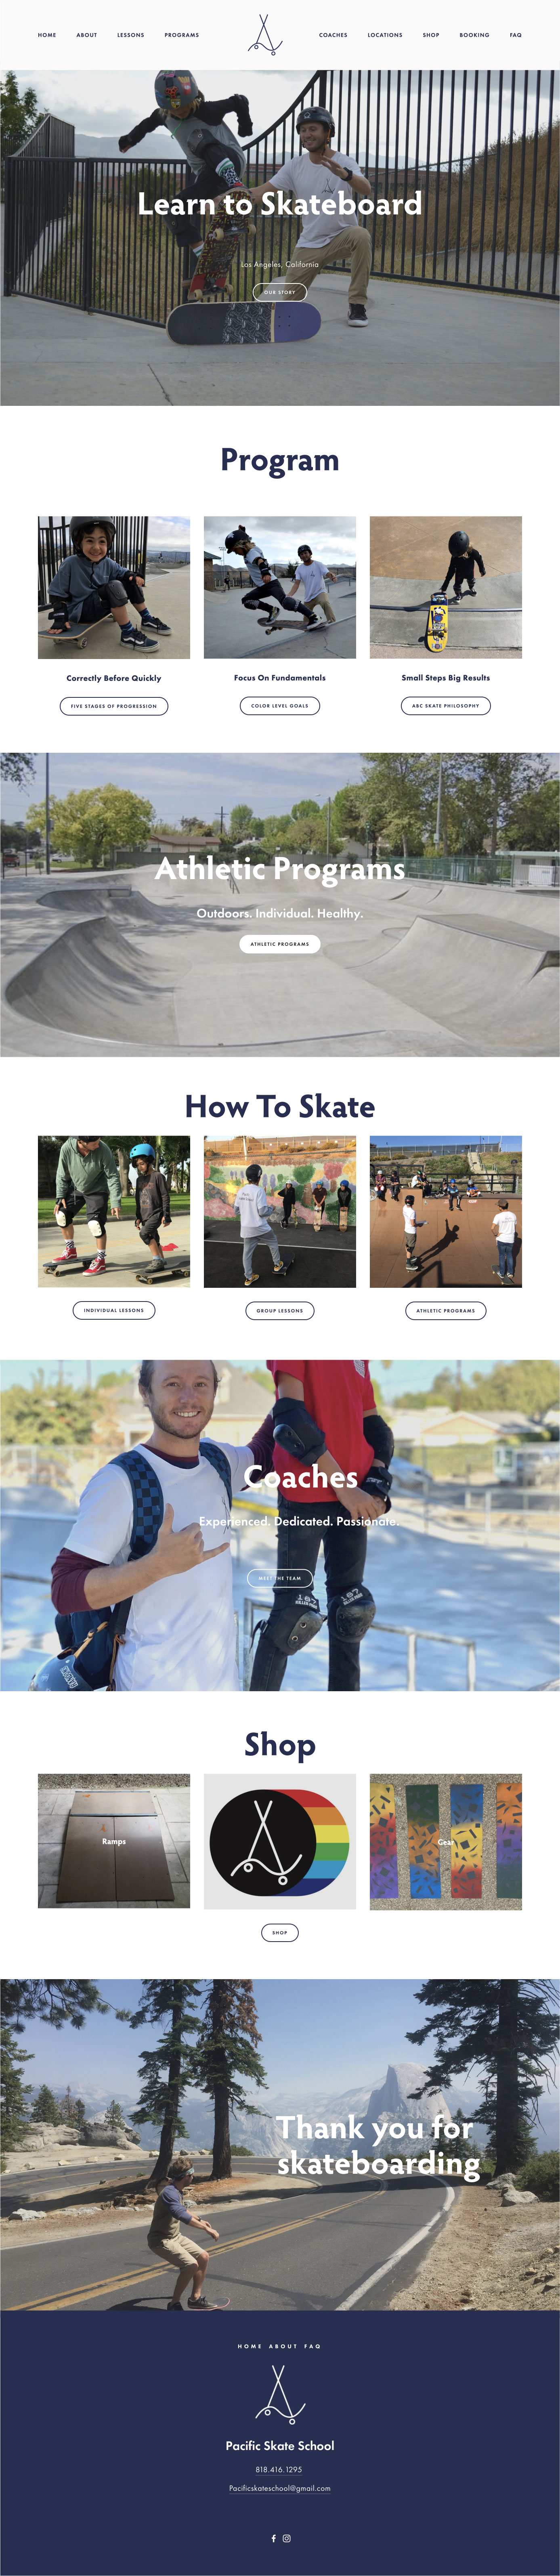 Pacific Skate School Home Page